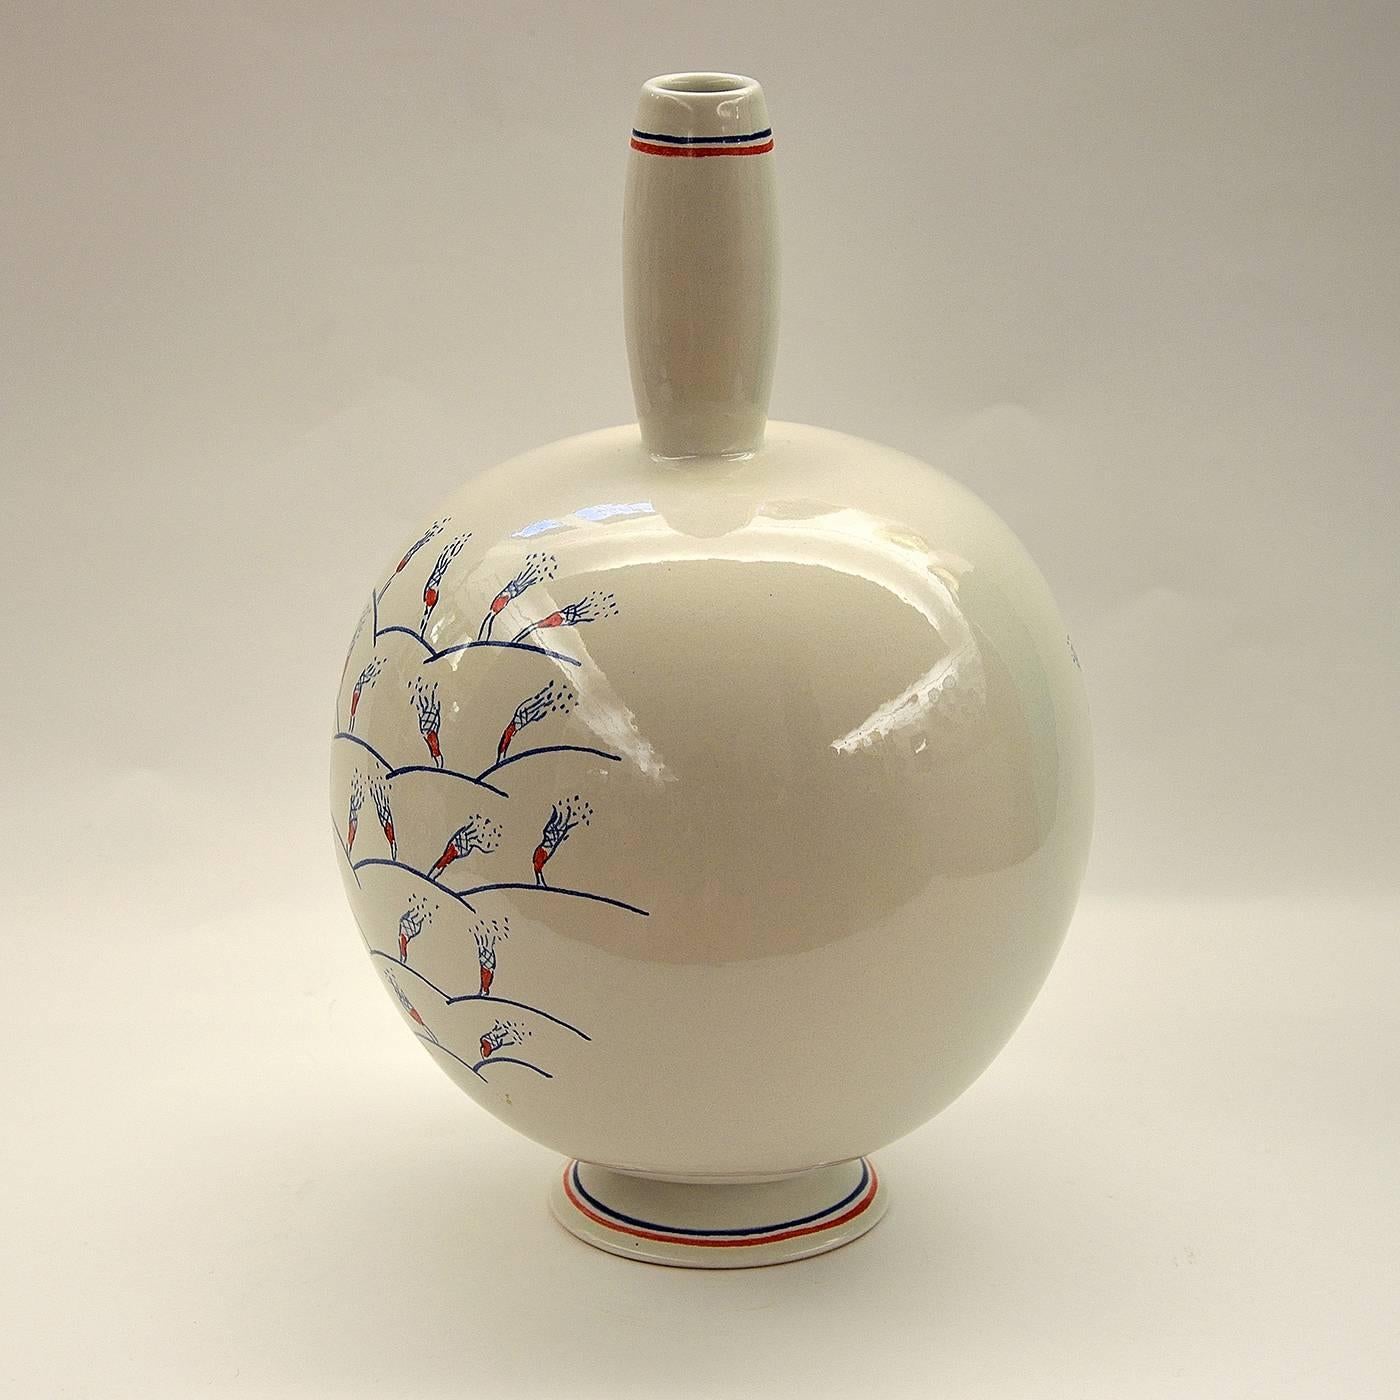 This ceramic vase was made on a lathe and enameled in earthenware. The whimsical pattern on the vase was hand-painted in blue and red over a shiny white base. This piece is one in a limited series of six crafted by Ugo La Pietra.